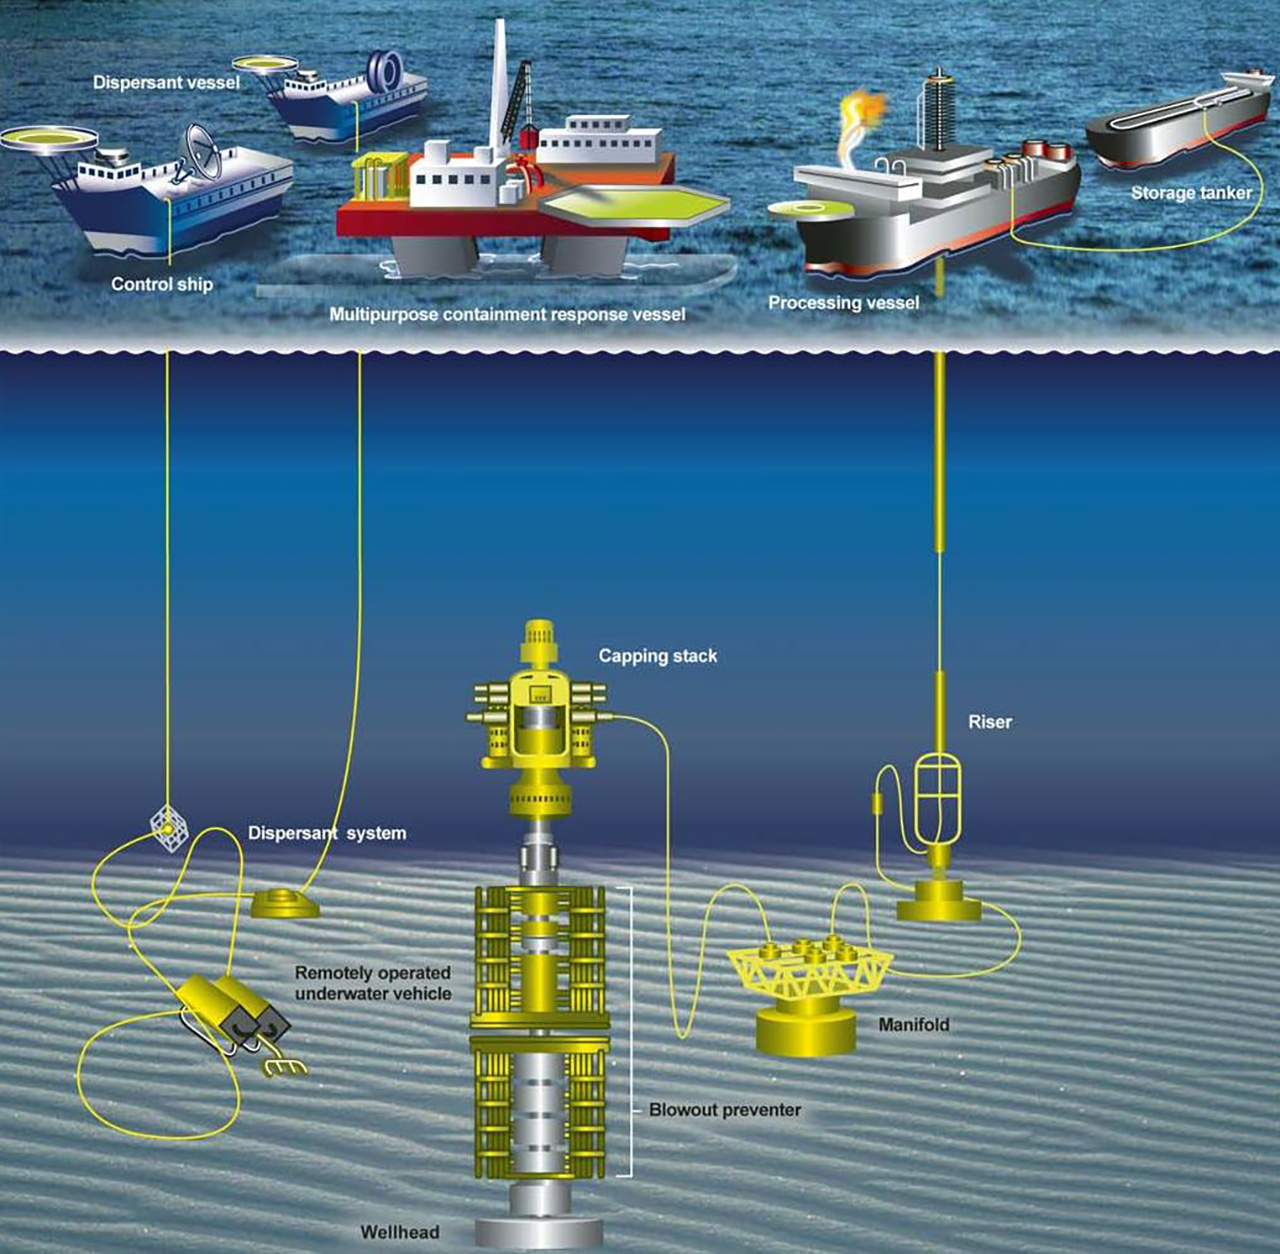 How does an oil rig work?